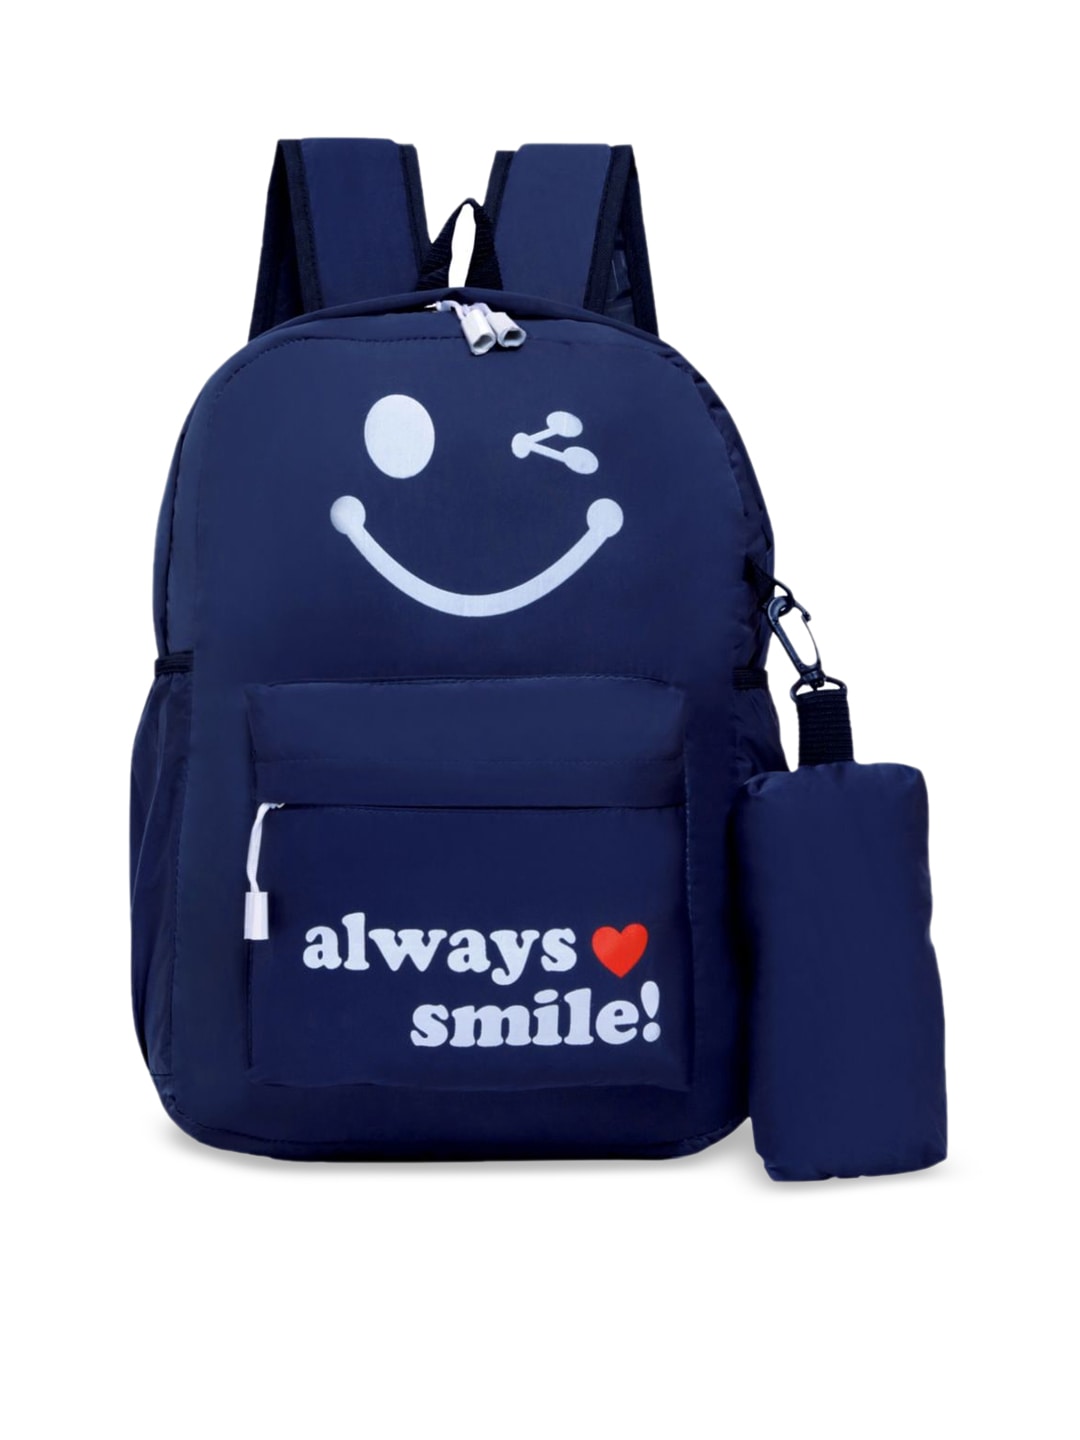 PLAYYBAGS Unisex Navy Blue Backpacks Price in India